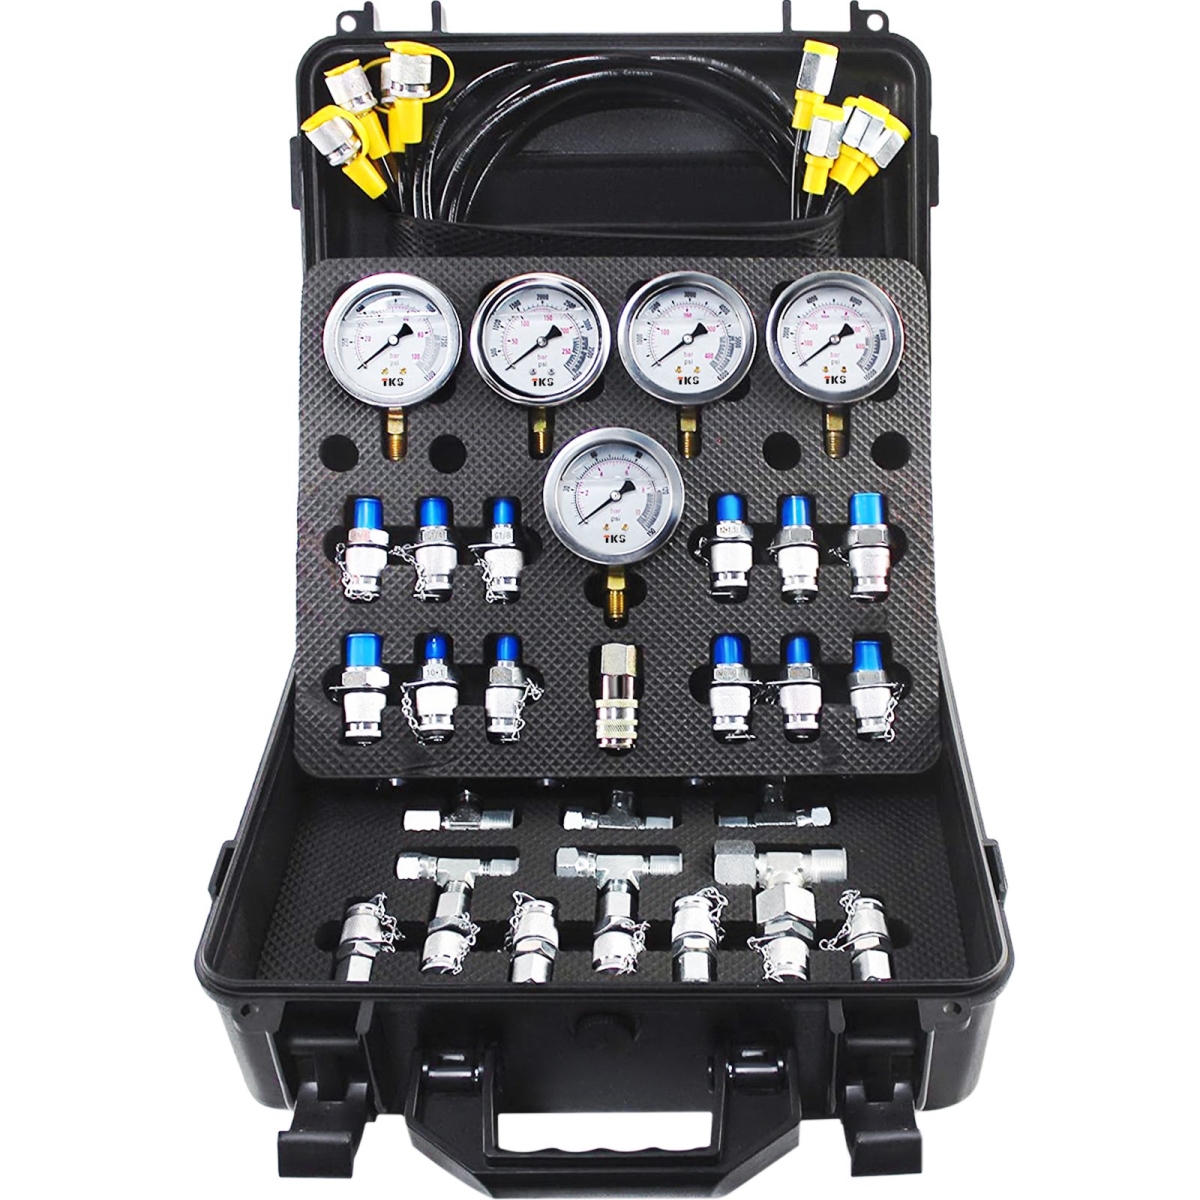 Picture of Vevor YLBBD60PSI350N2B9V0 5 ga 13 Test Couplings 14 Tee Connectors 5 Test Hoses Hydraulic Pressure Test Kit